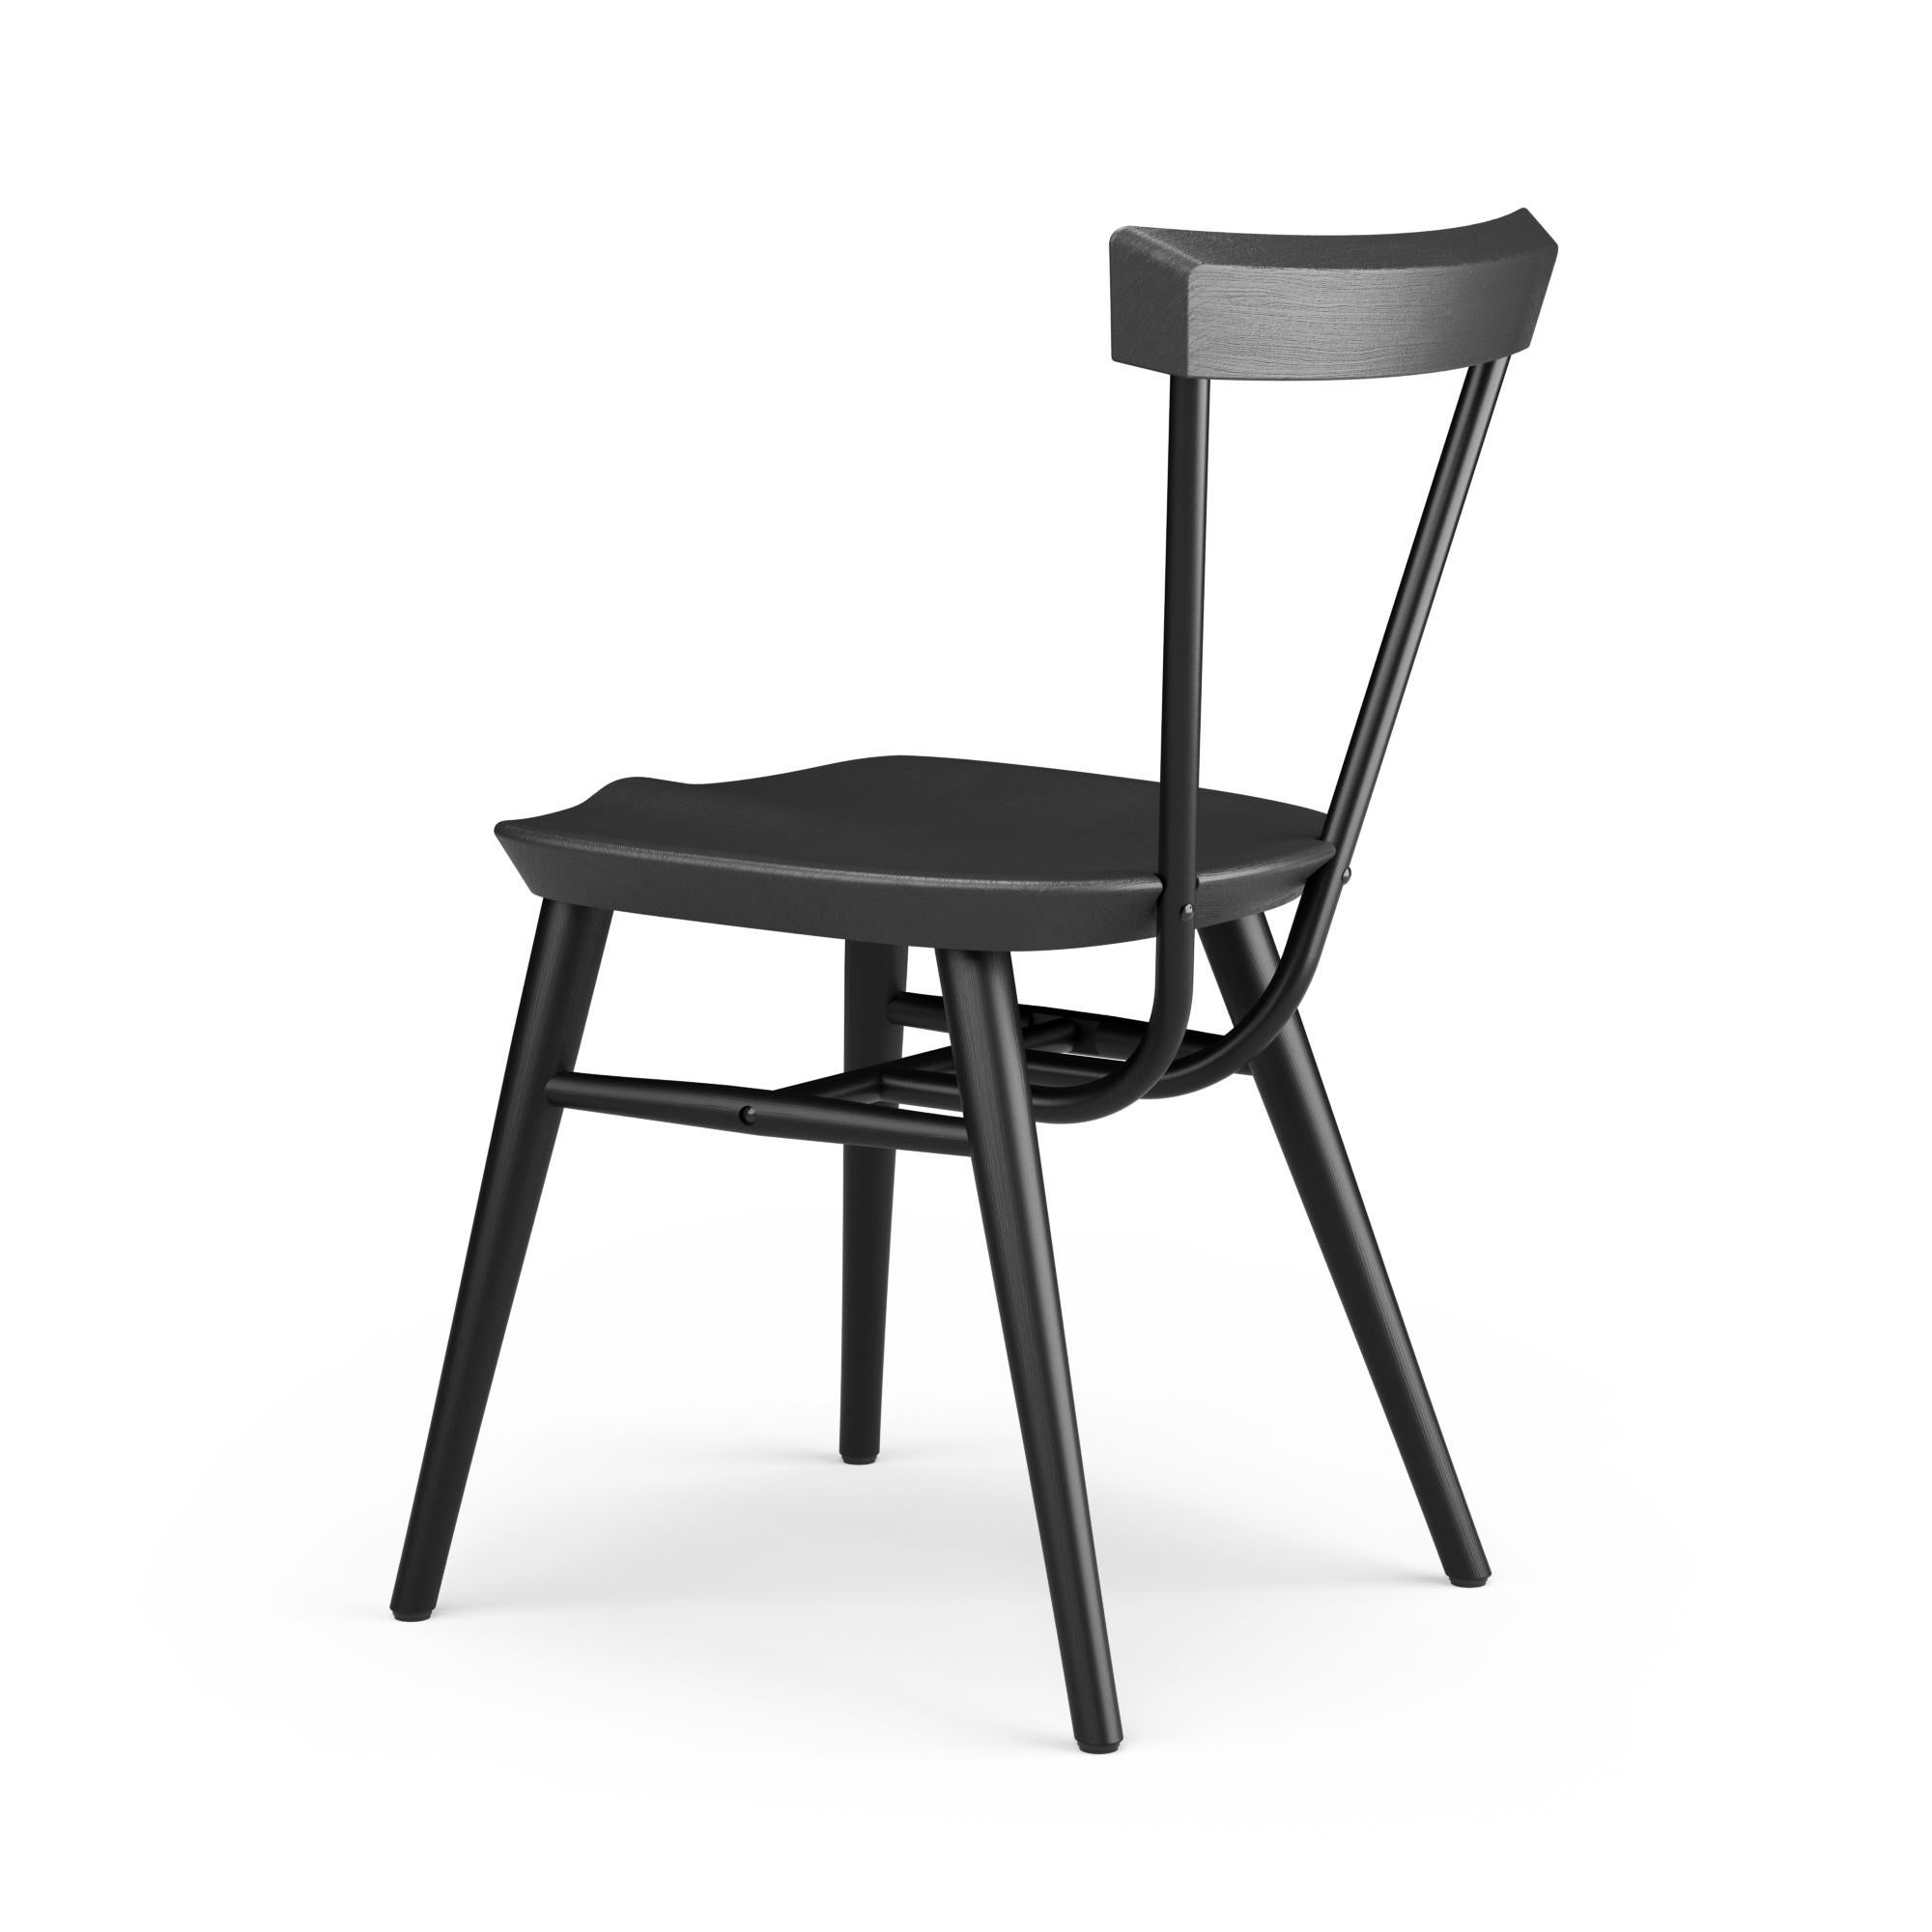 Mexican Hayche, W Tube Chair - Black, United Kingdom, Made To Order For Sale